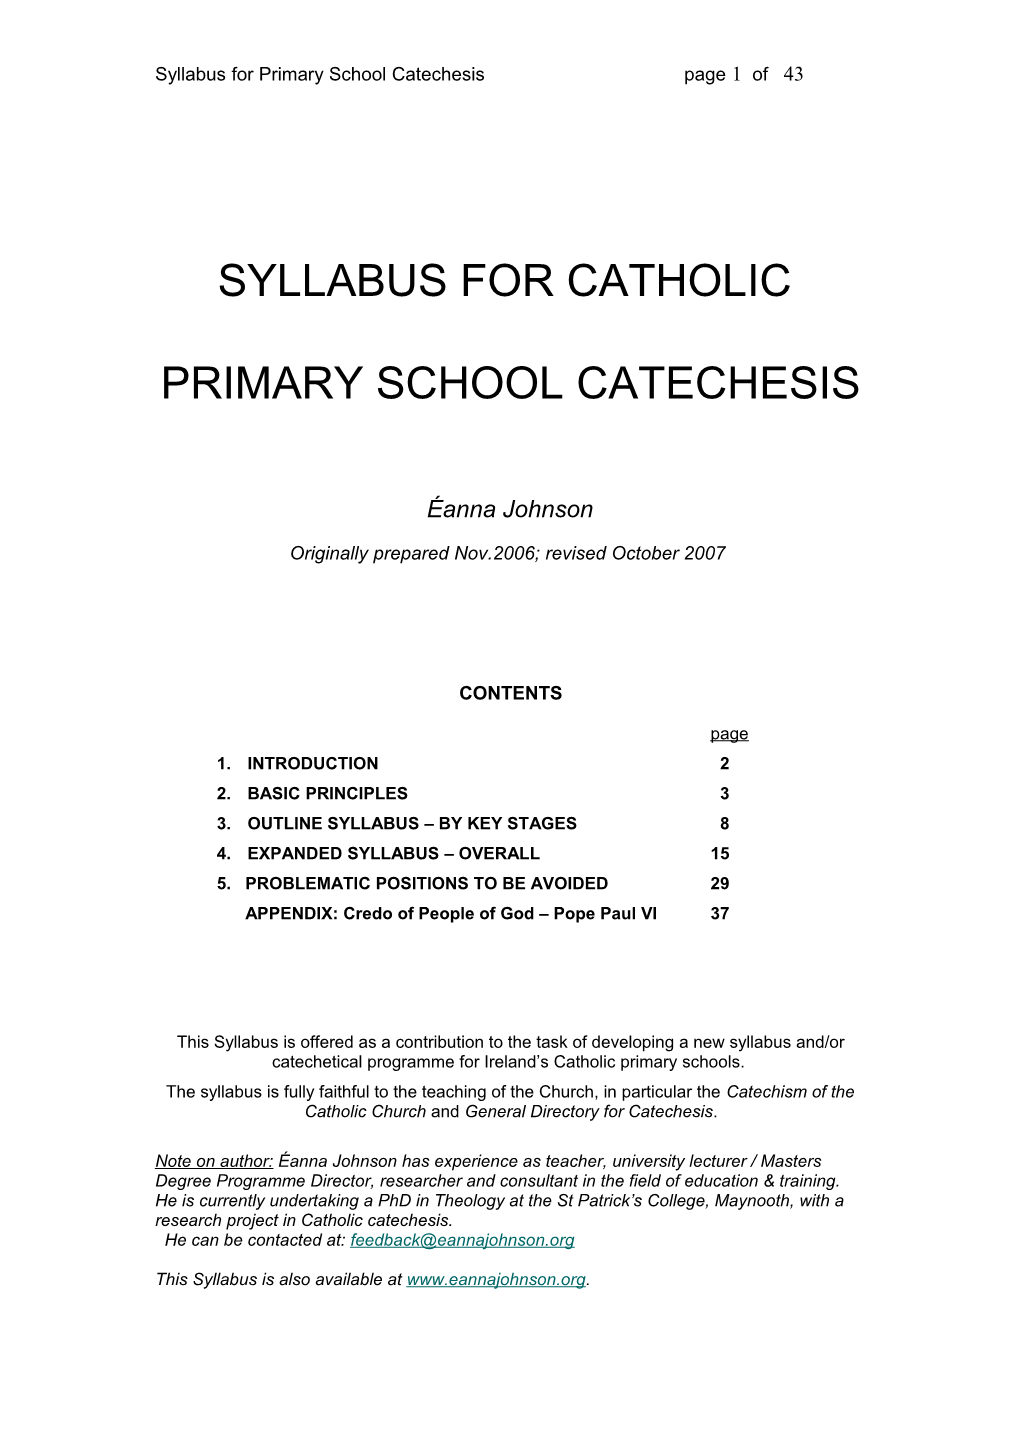 Syllabus for Primary School Catechesis Page 1 of 41